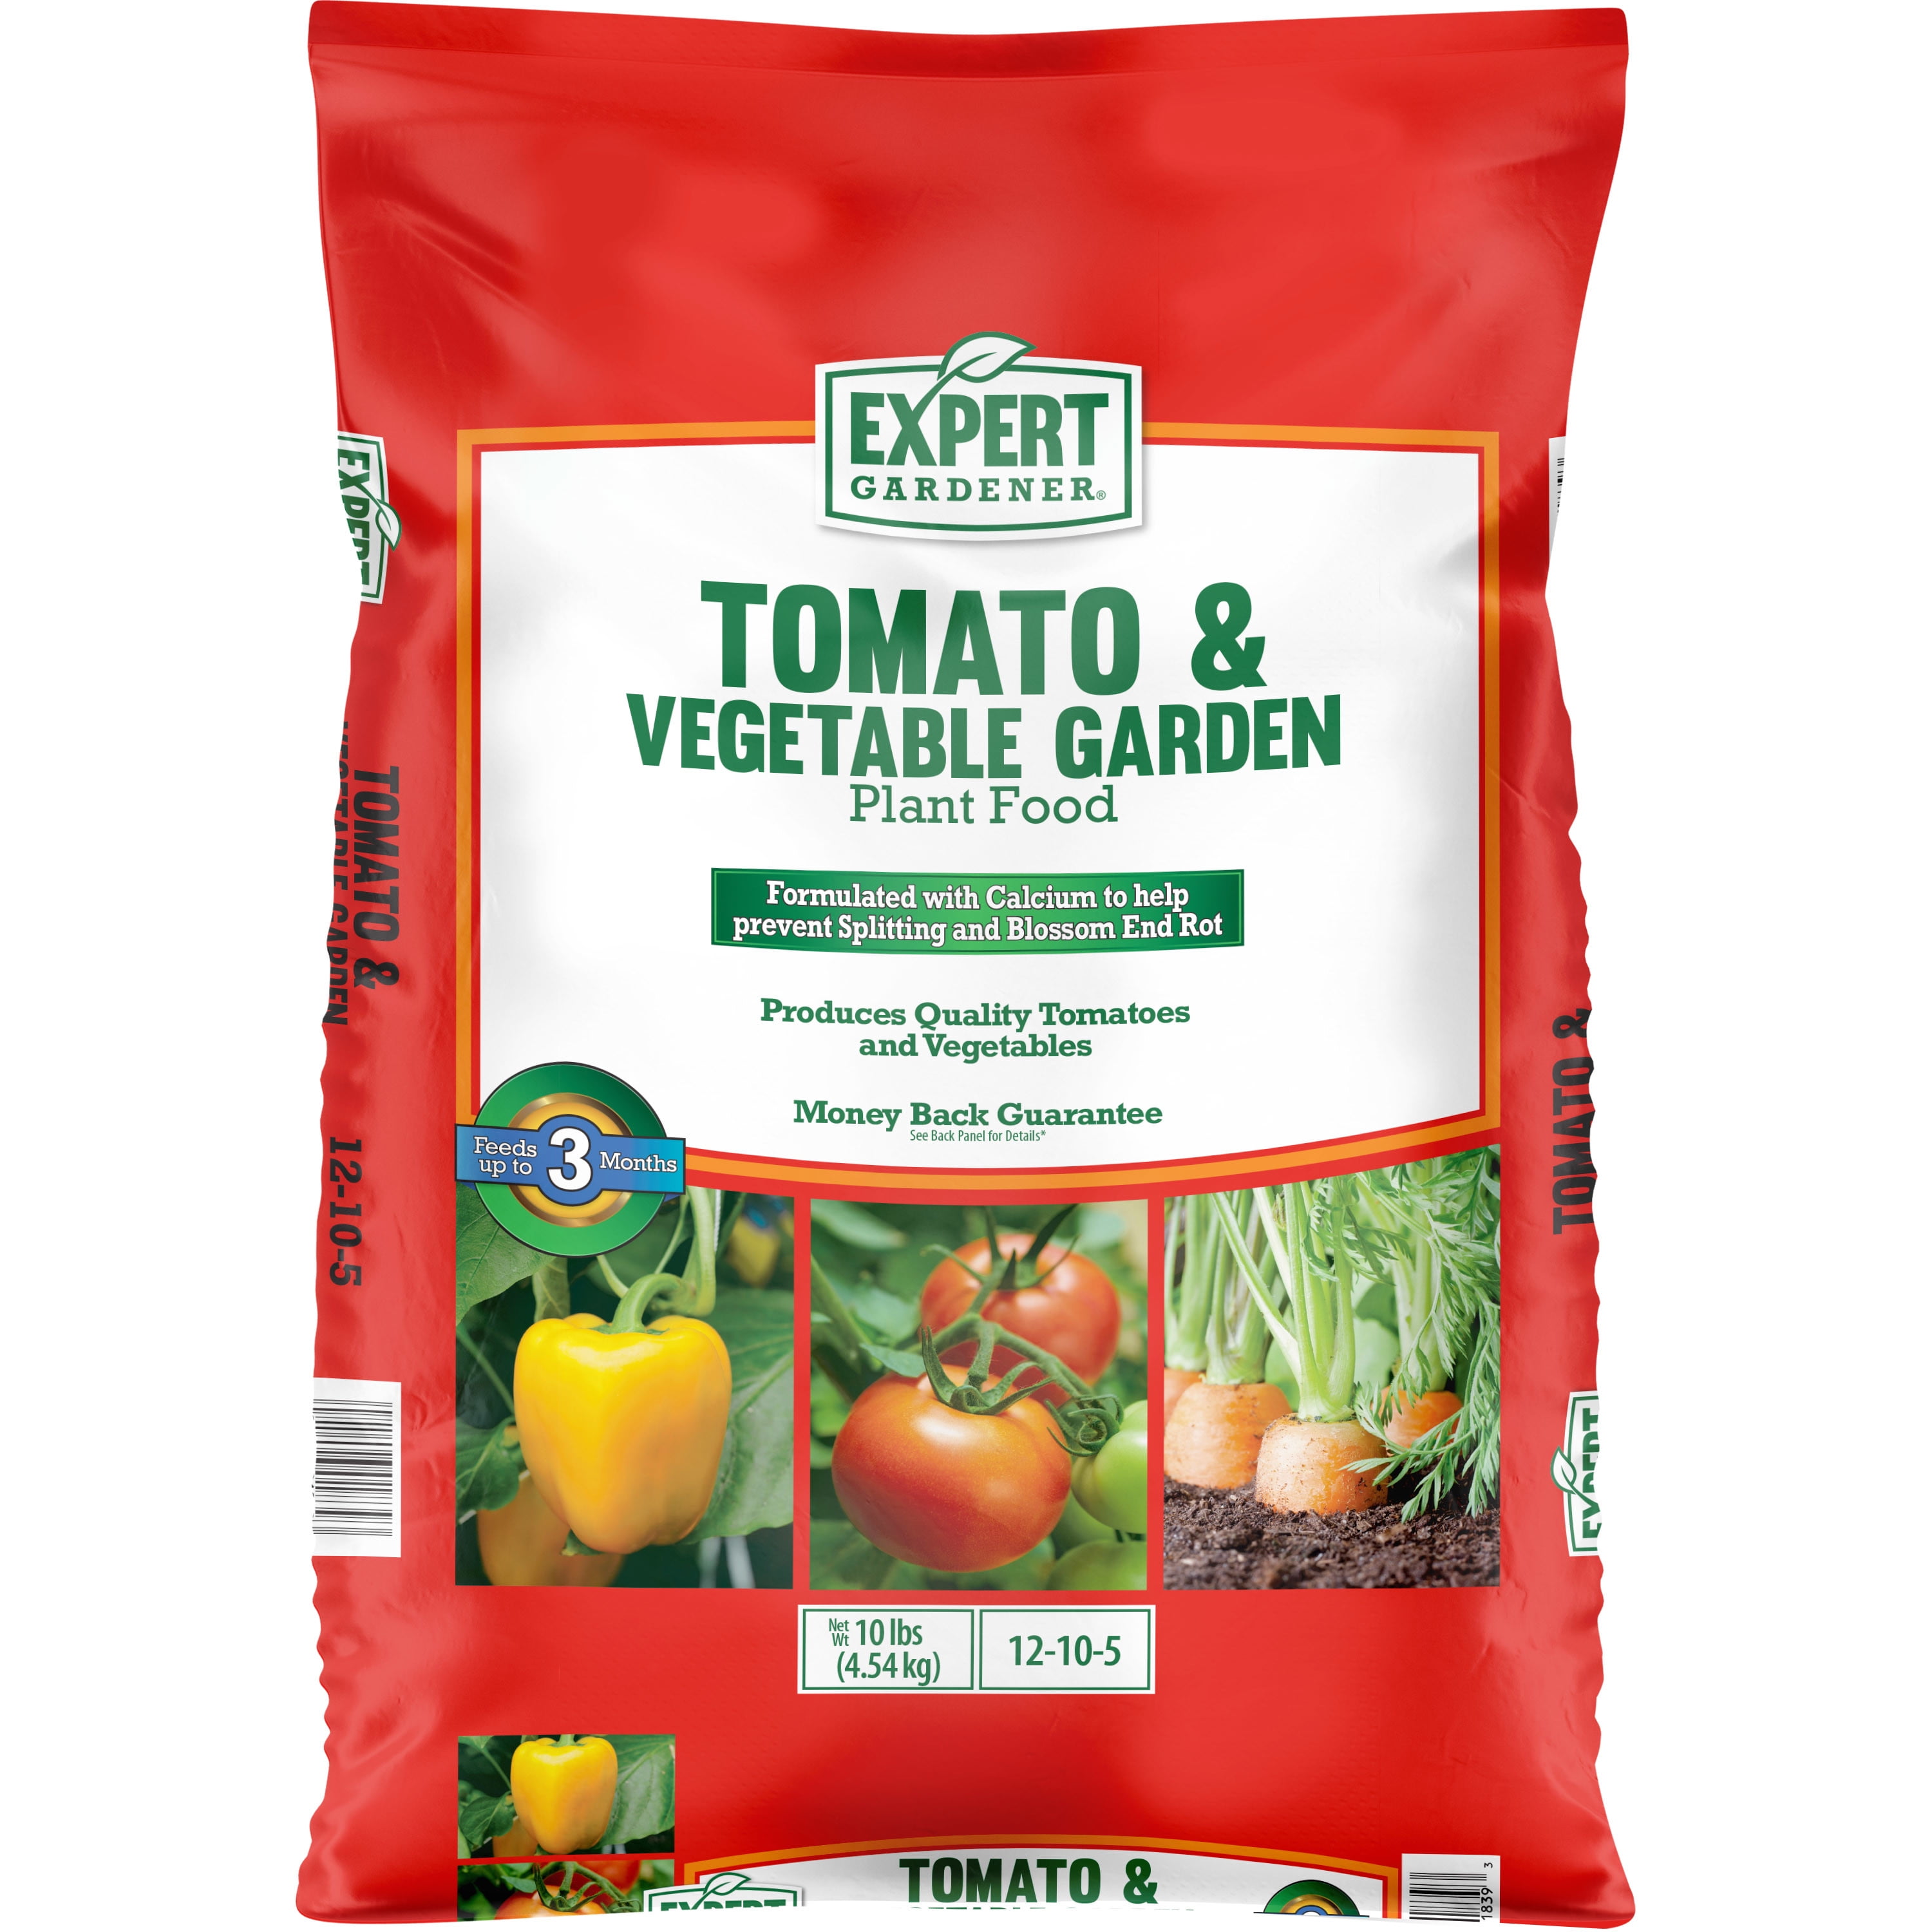 how to use expert gardener tomato and vegetable plant food? 2